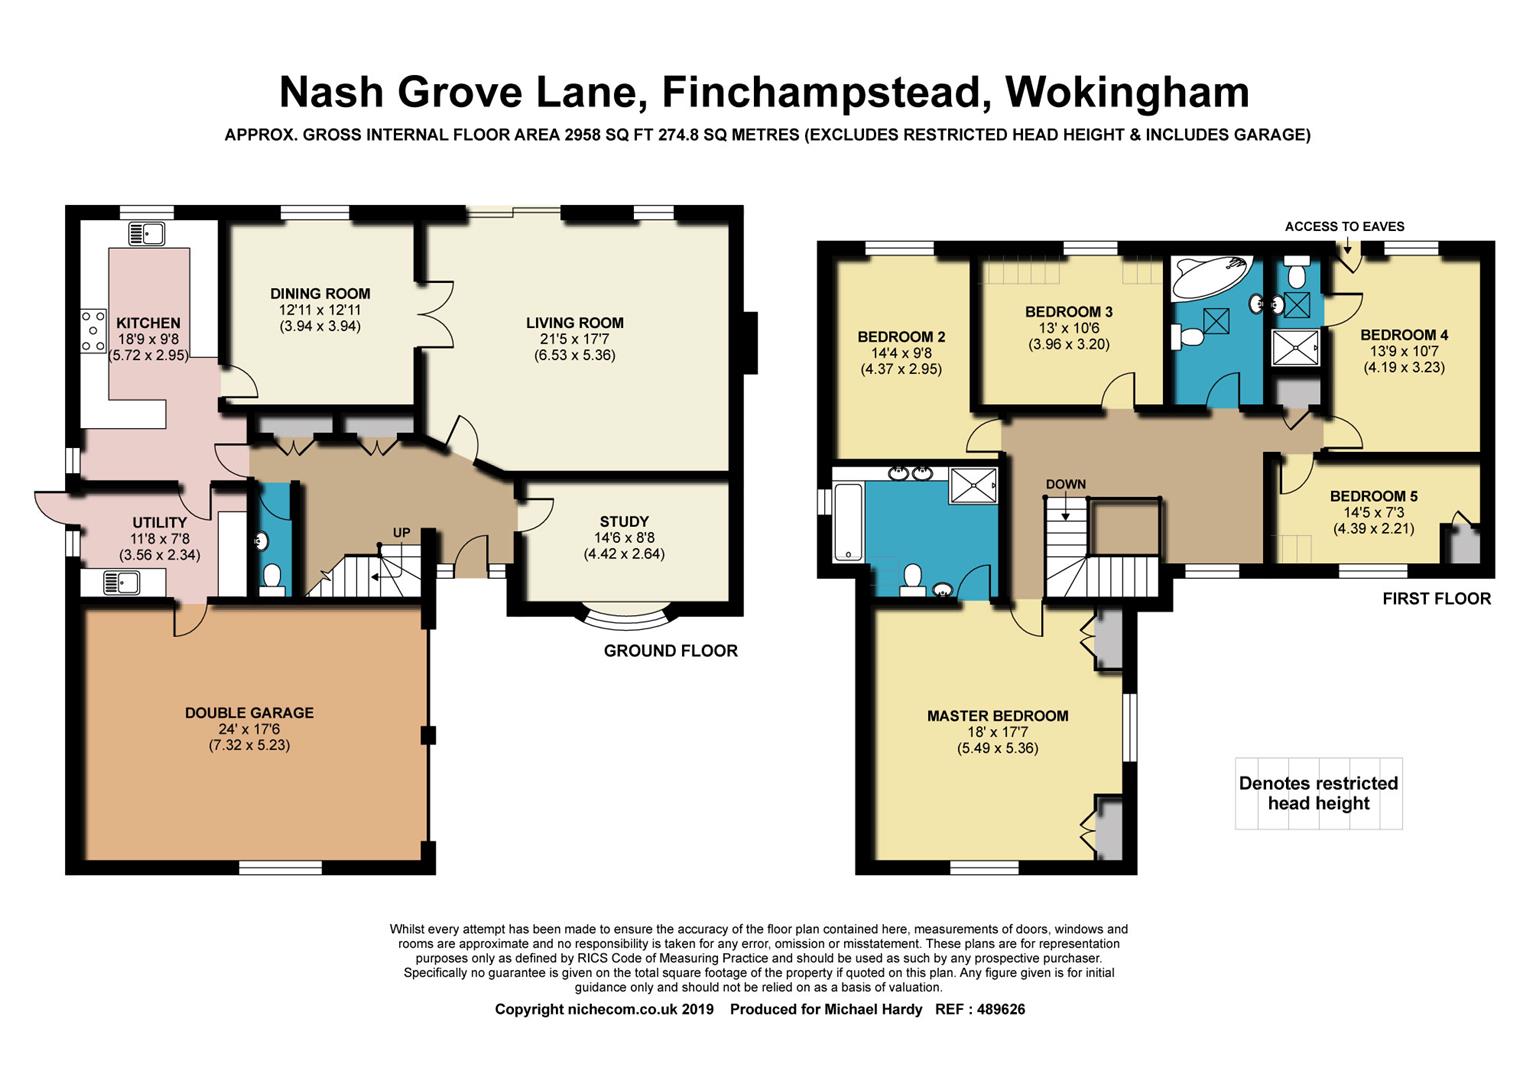 5 Bedrooms Detached house for sale in Nashgrove Lane, Finchampstead, Berkshire RG40